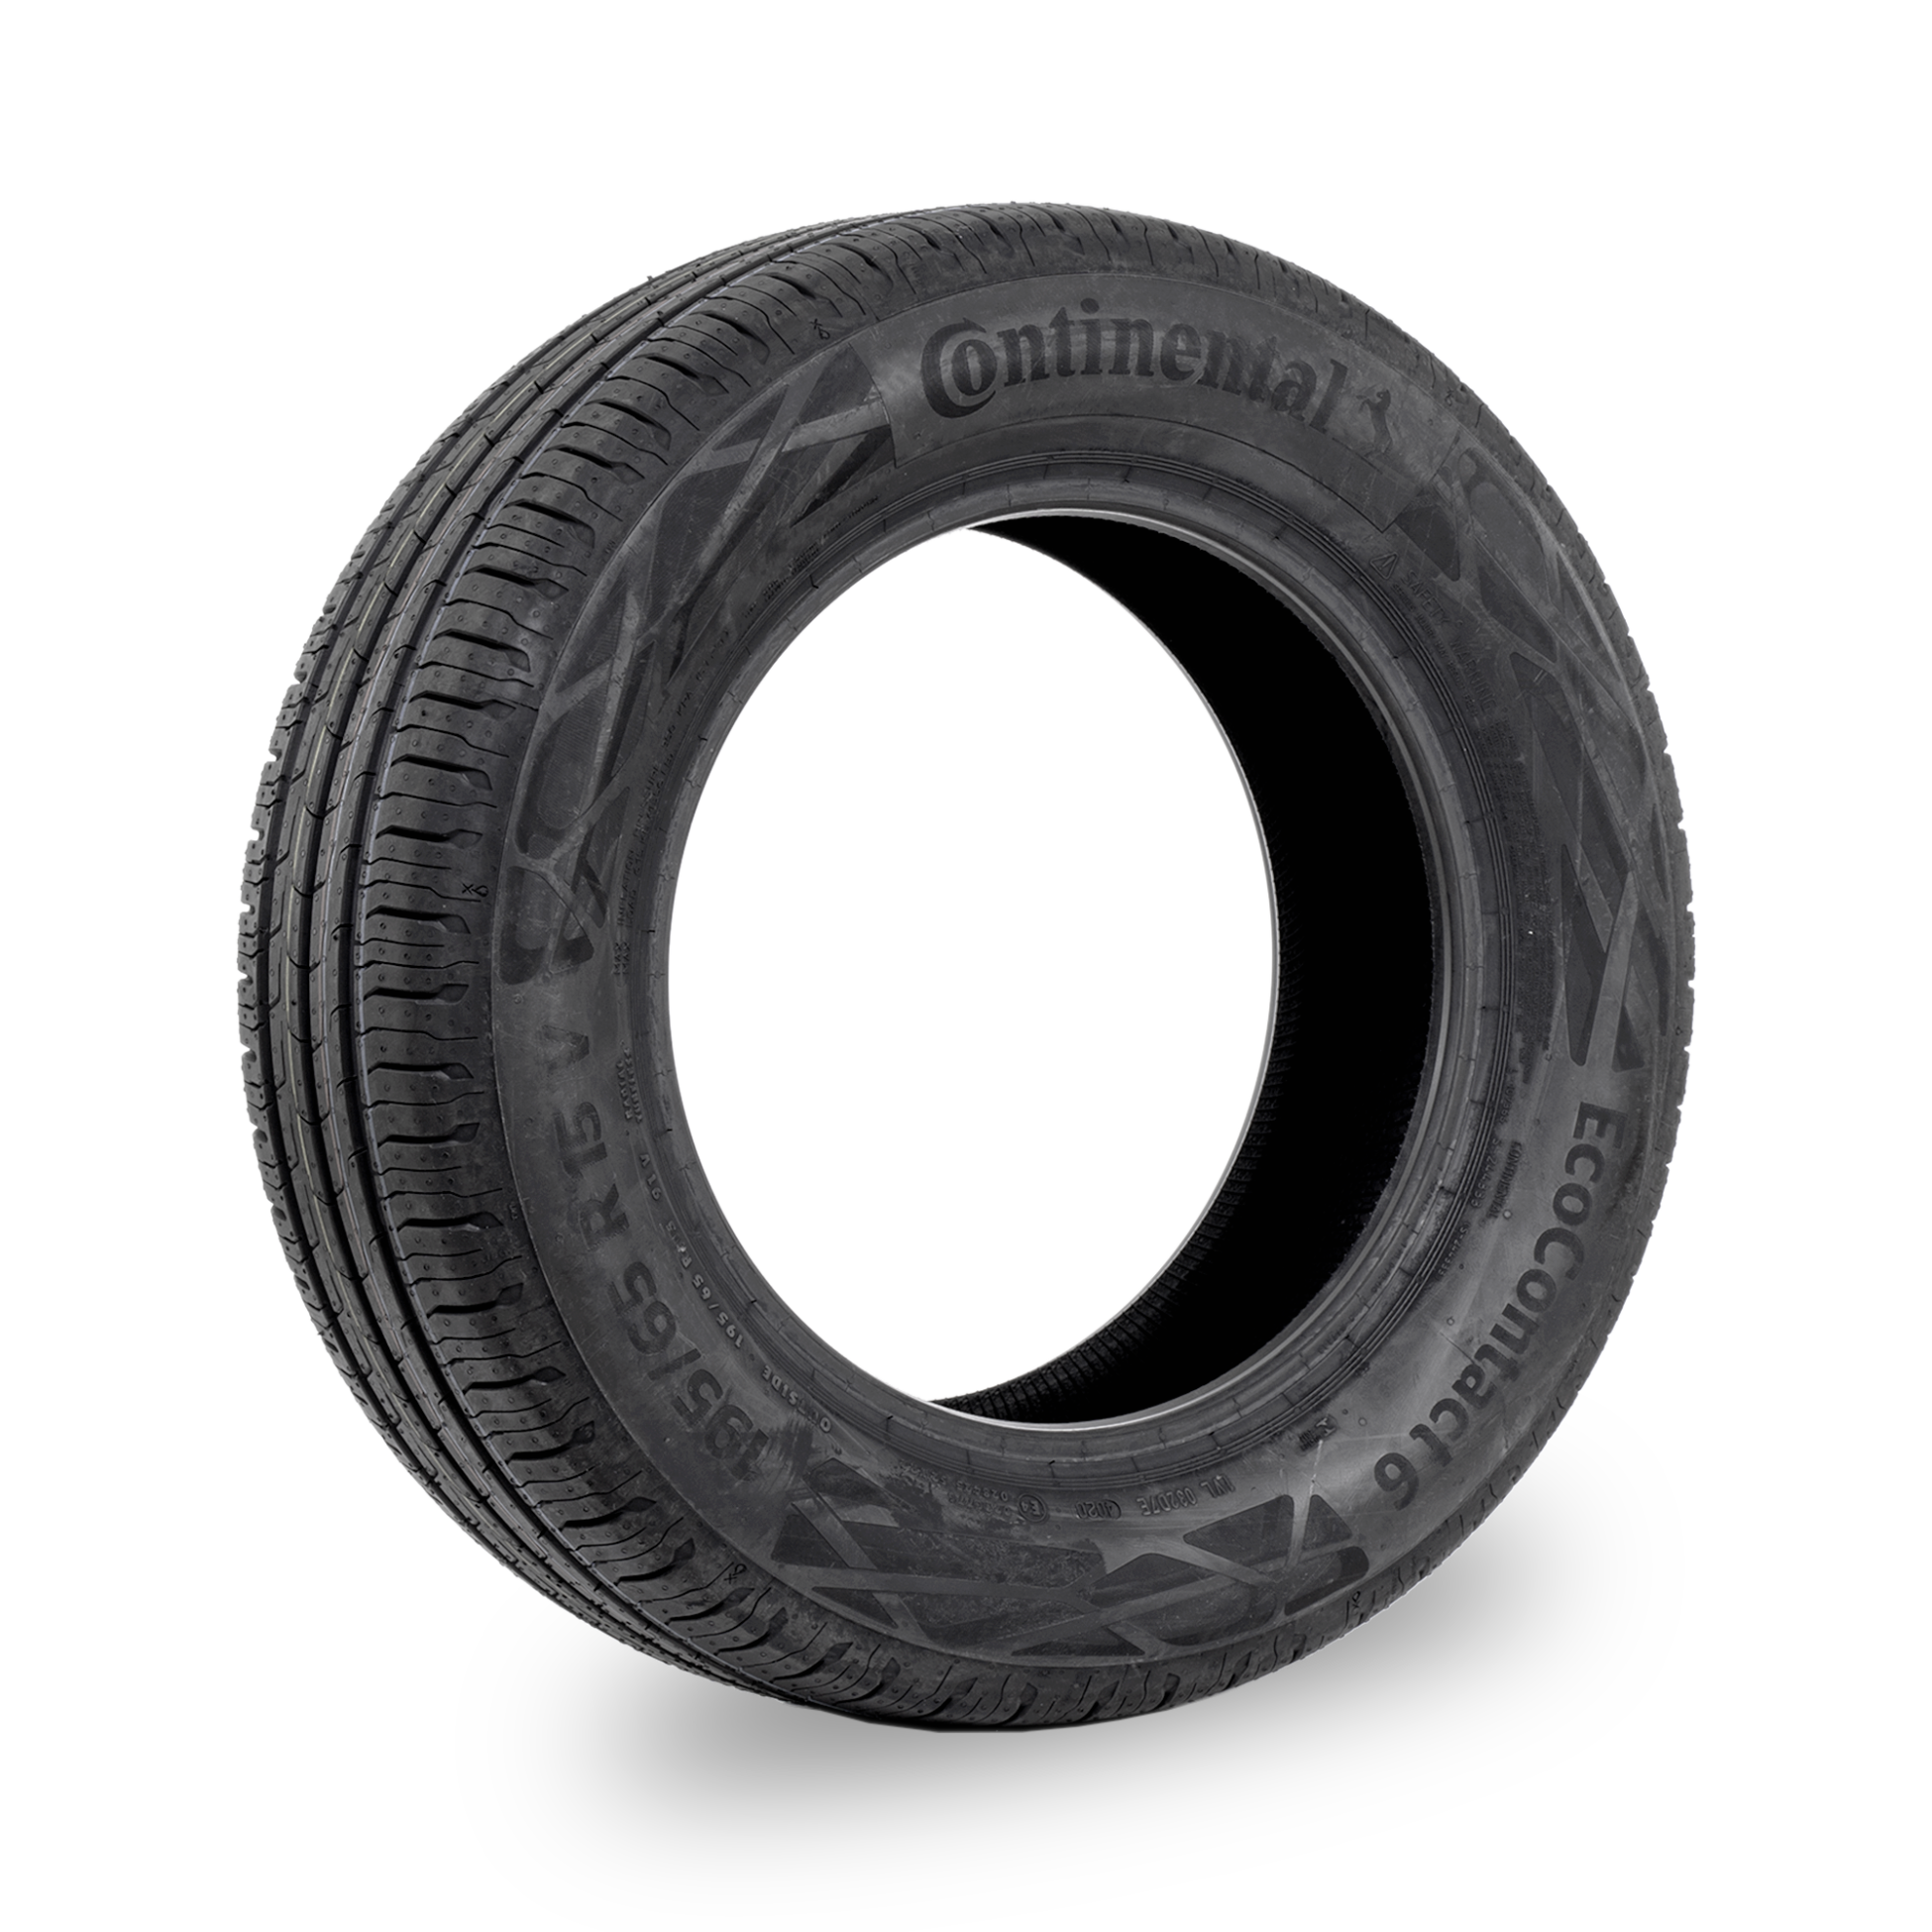 195/65/15 Continental Eco Contact 6 91V Tyre - 4x4 Tyres